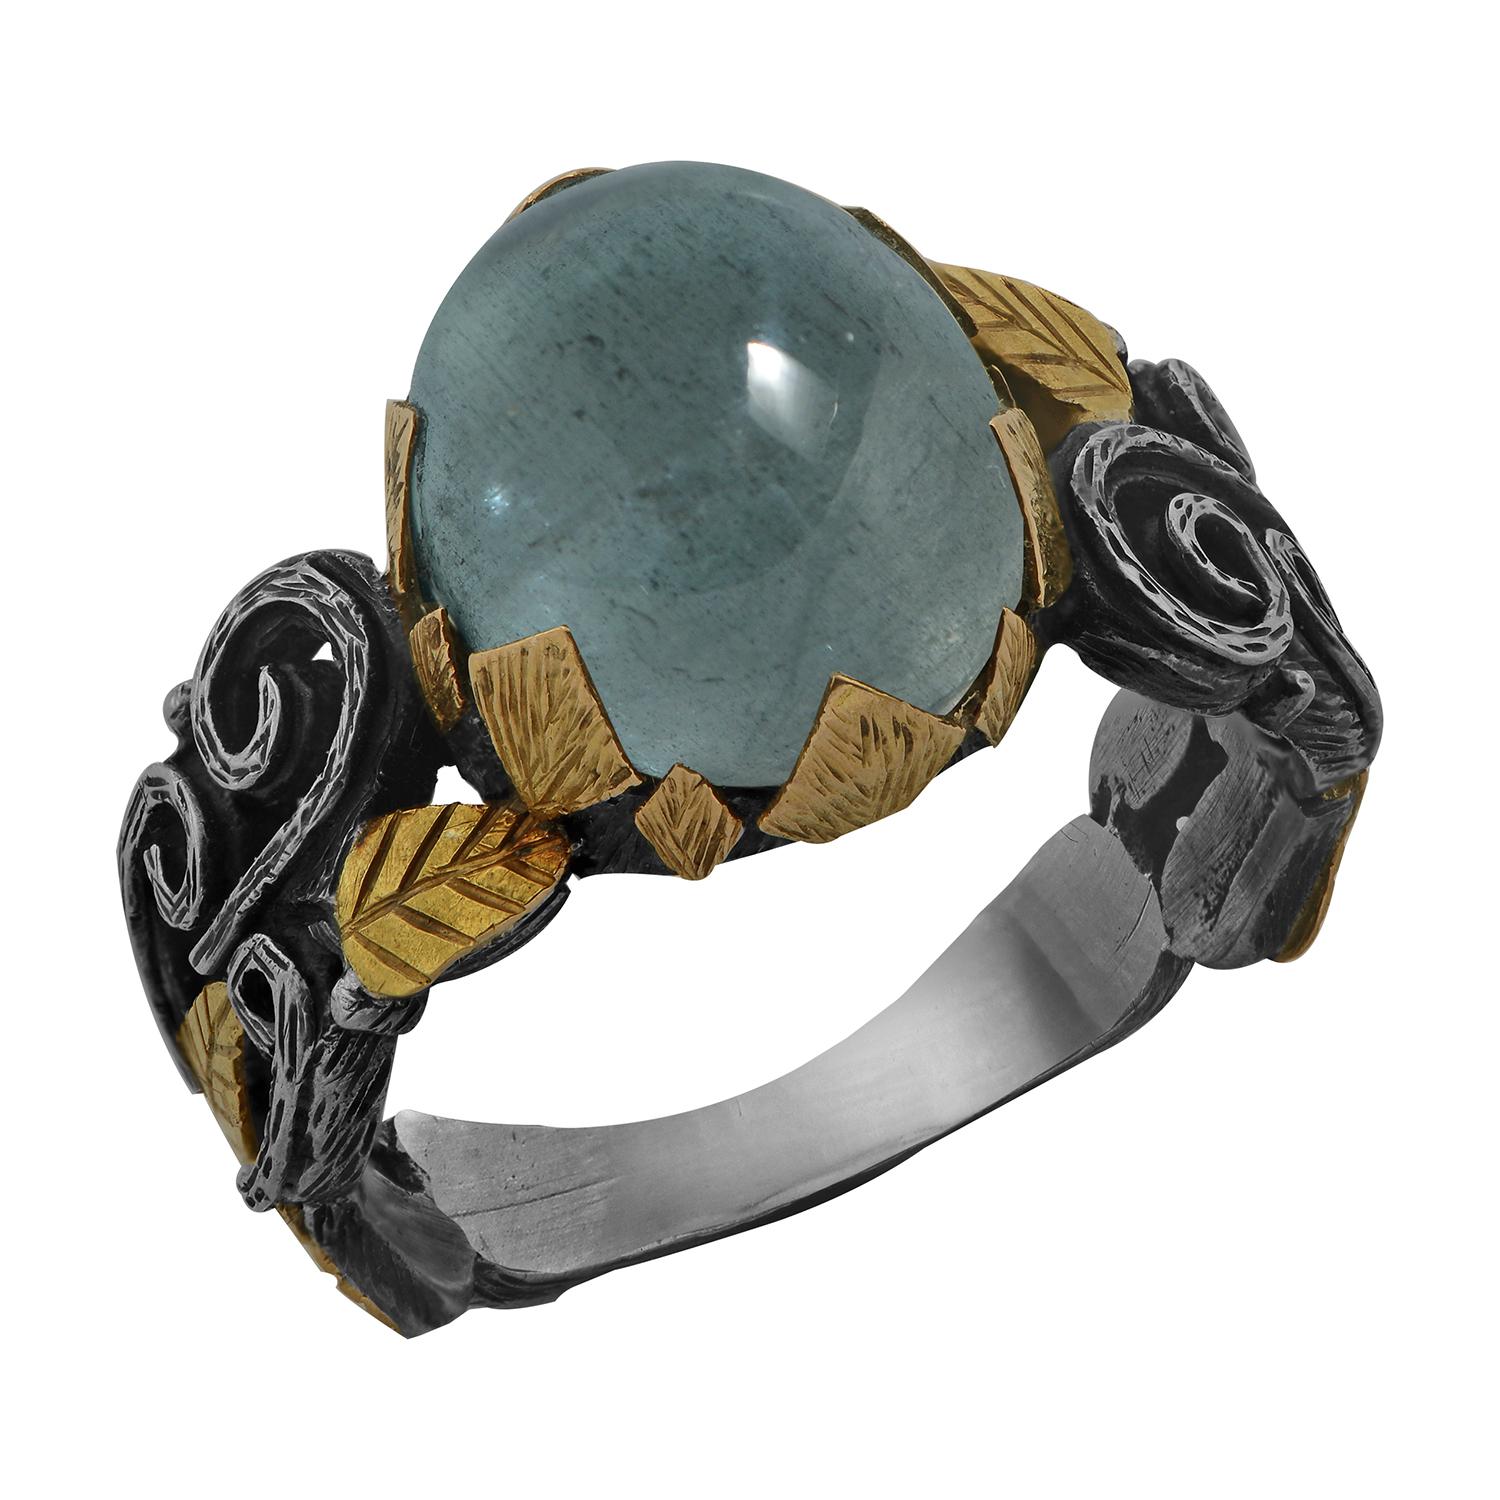 

This gorgeous one-of-a-kind aquamarine ring has been handmade in our workshops. It features a central cabochon aquamarine, set in 18k gold hand-engraved motifs. The shank is a mixture of oxidized sterling silver and 18k gold which also has